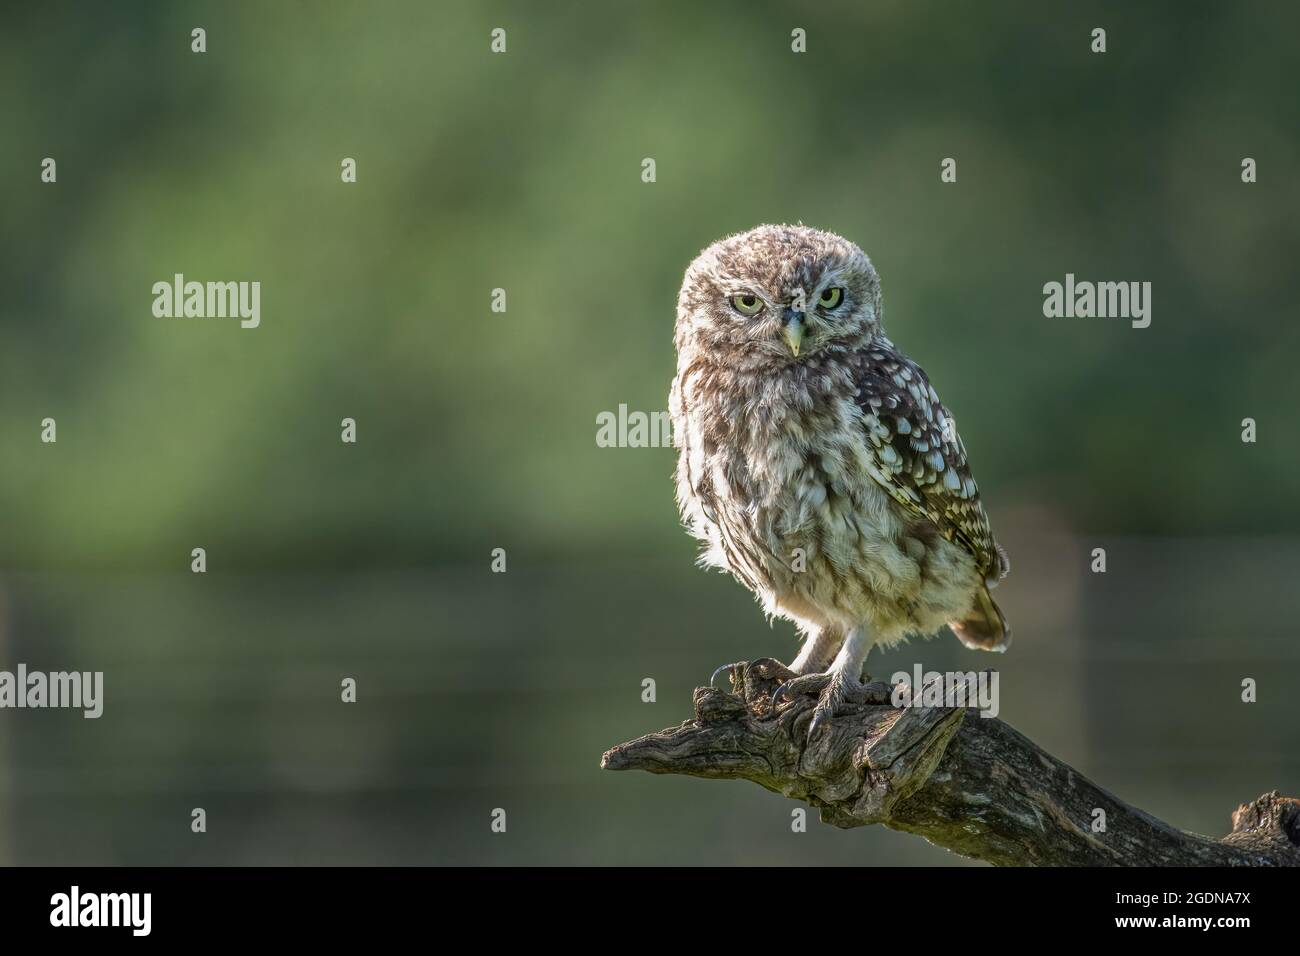 Little Owl Looking at Camera. Stock Photo